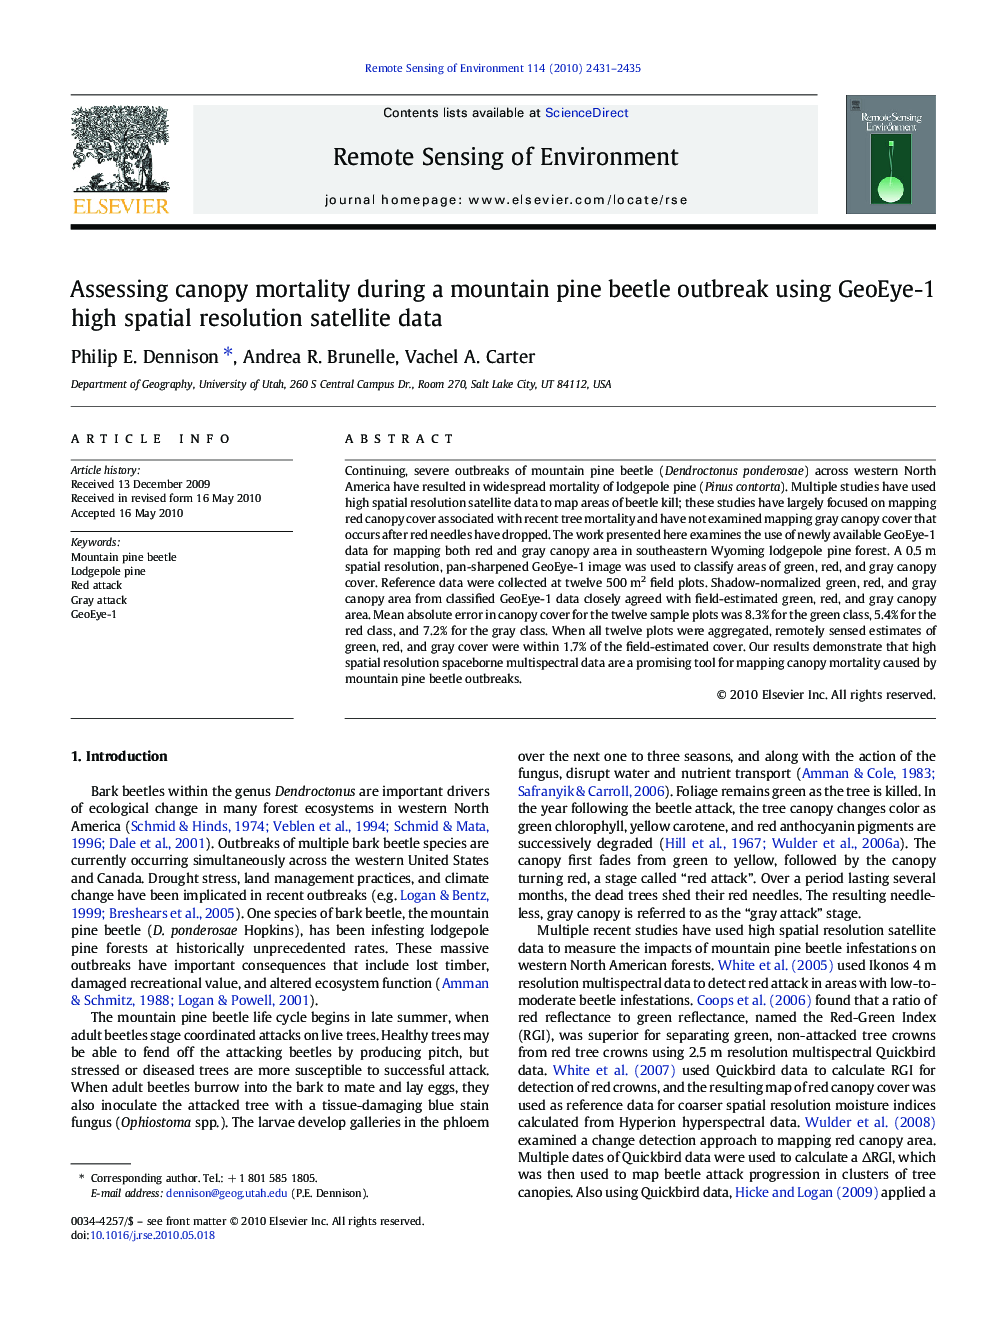 Assessing canopy mortality during a mountain pine beetle outbreak using GeoEye-1 high spatial resolution satellite data